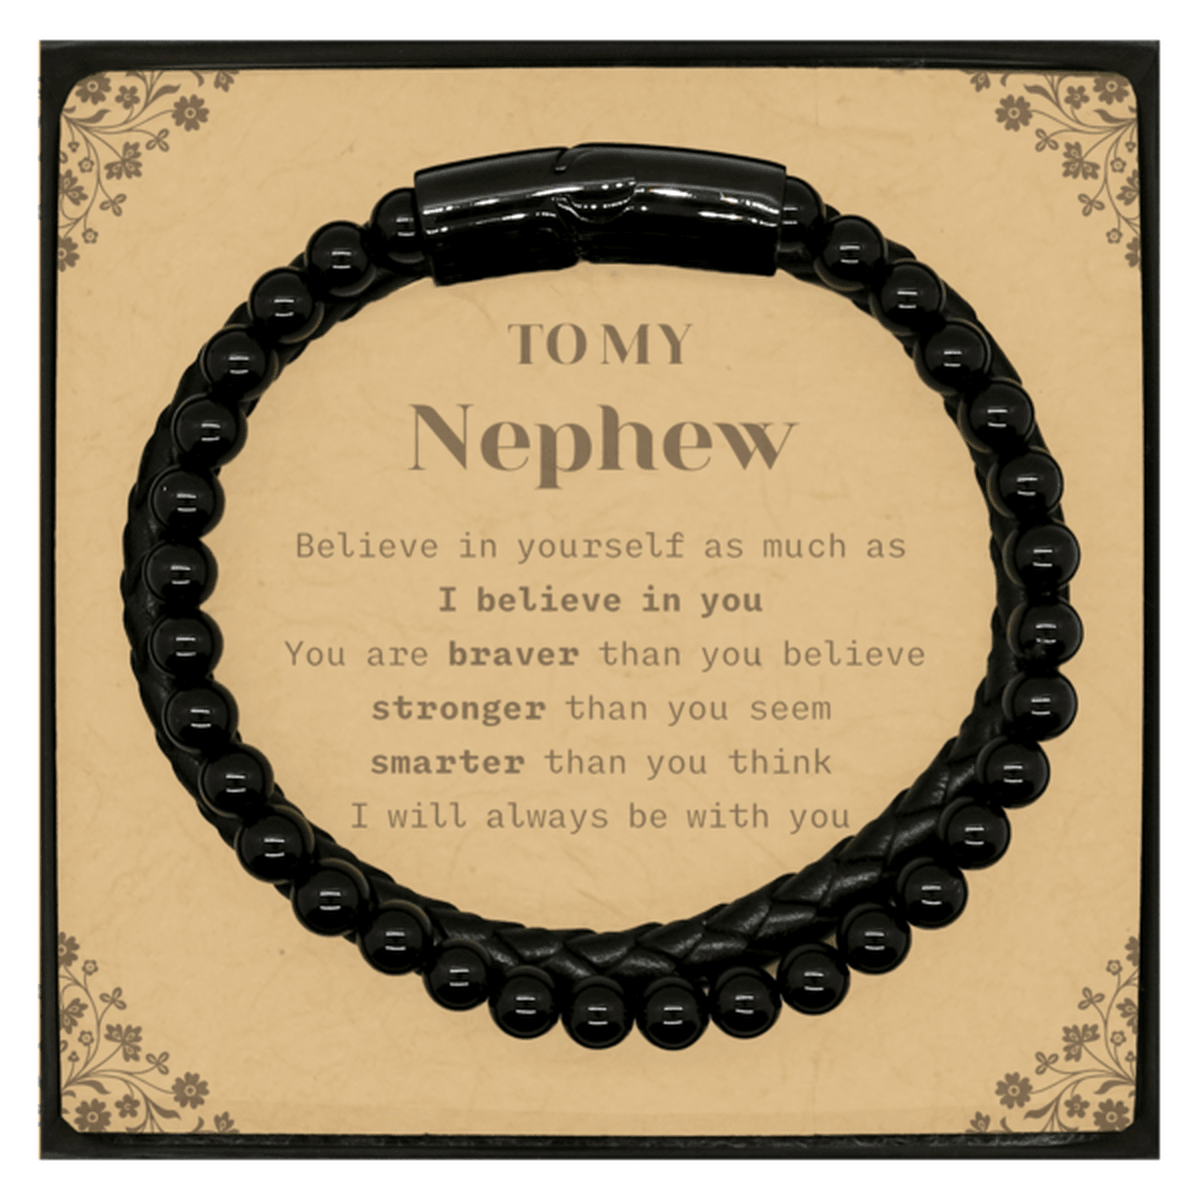 Nephew Stone Leather Bracelets Gifts, To My Nephew You are braver than you believe, stronger than you seem, Inspirational Gifts For Nephew Card, Birthday, Christmas Gifts For Nephew Men Women